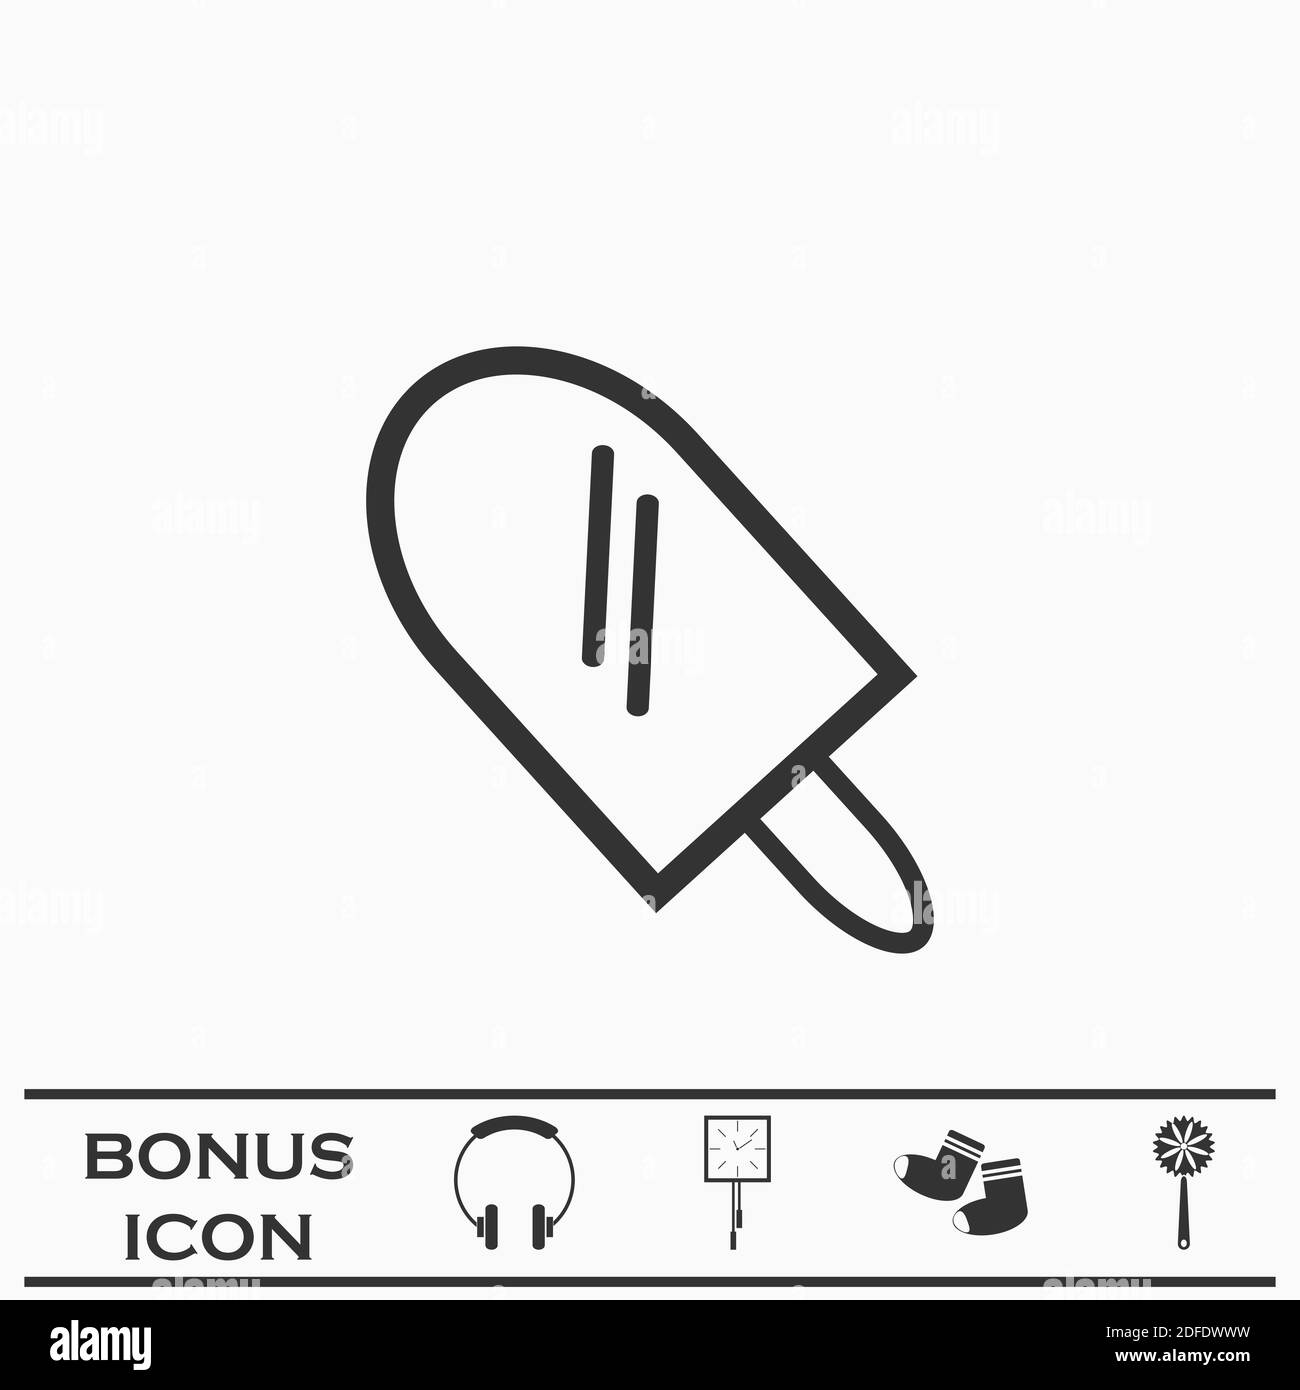 Ice lolly icon flat. Black pictogram on white background. Vector illustration symbol and bonus button Stock Vector